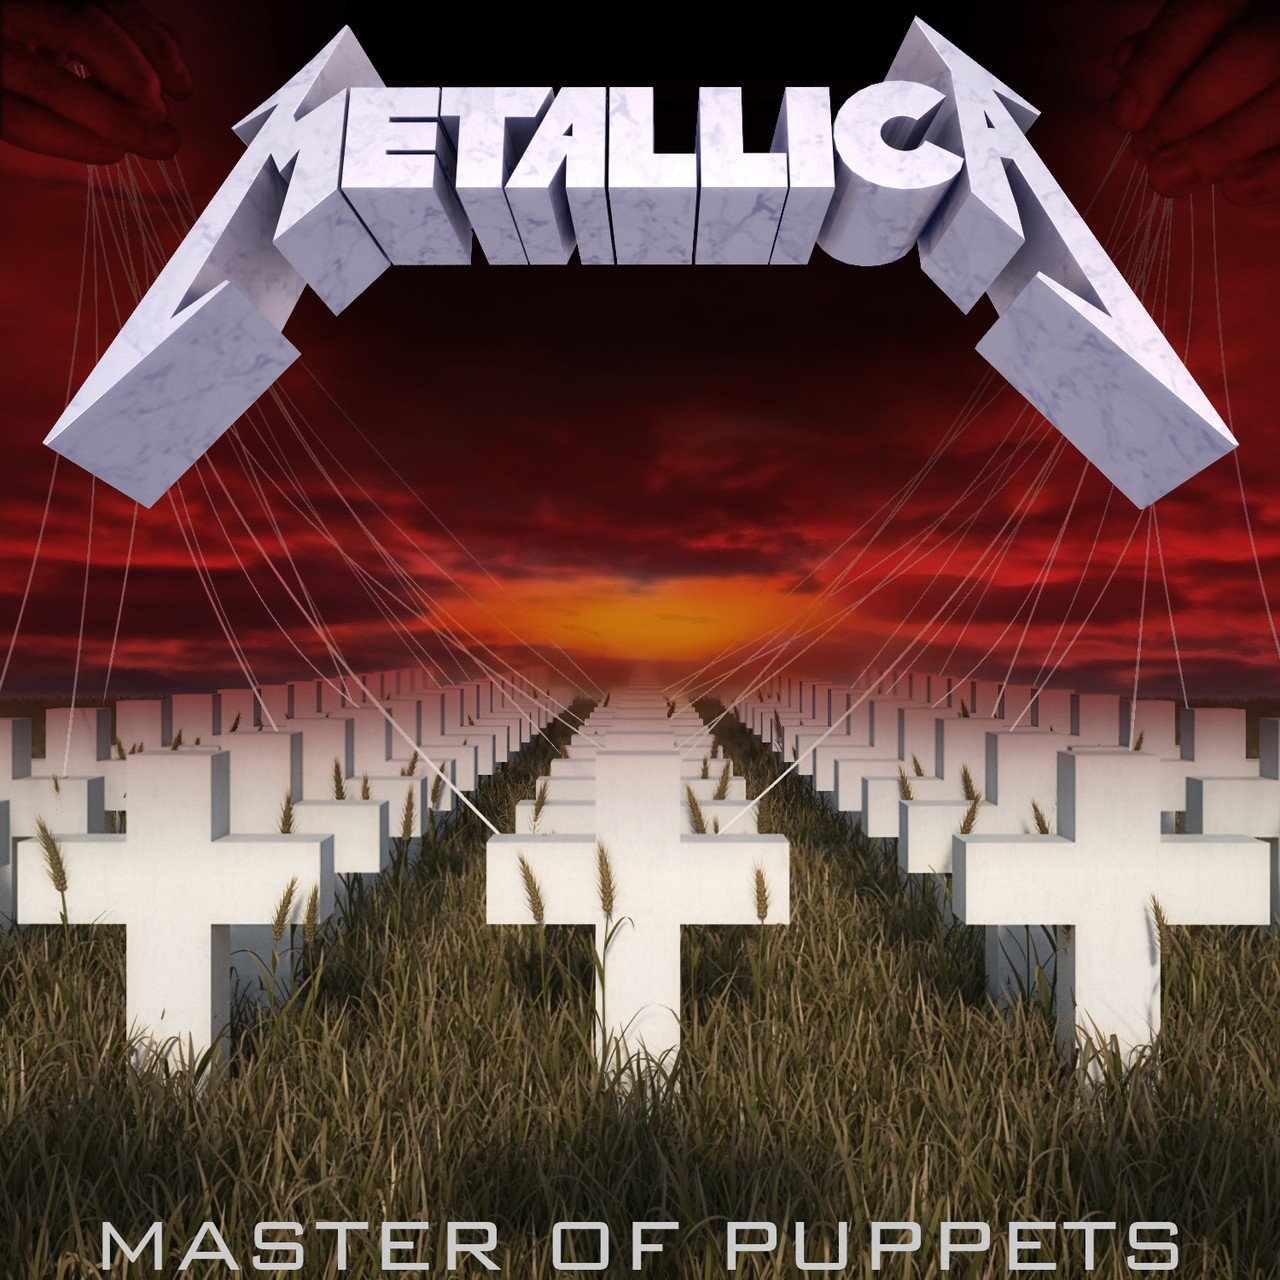 Metallica - Master Of Puppets (Remastered 180g) - LP